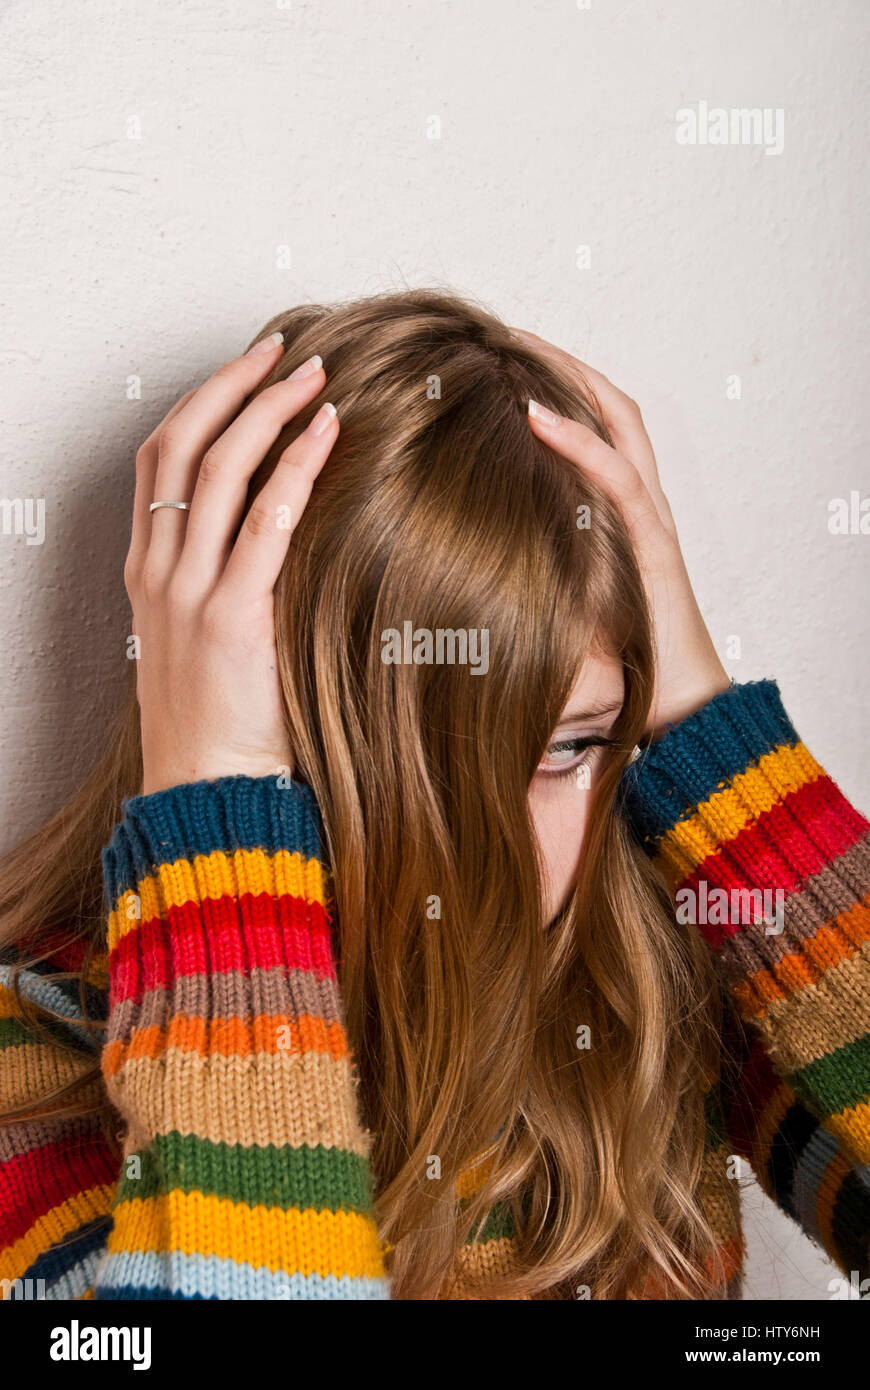 blond girl afraid, domestic violence concept Stock Photo